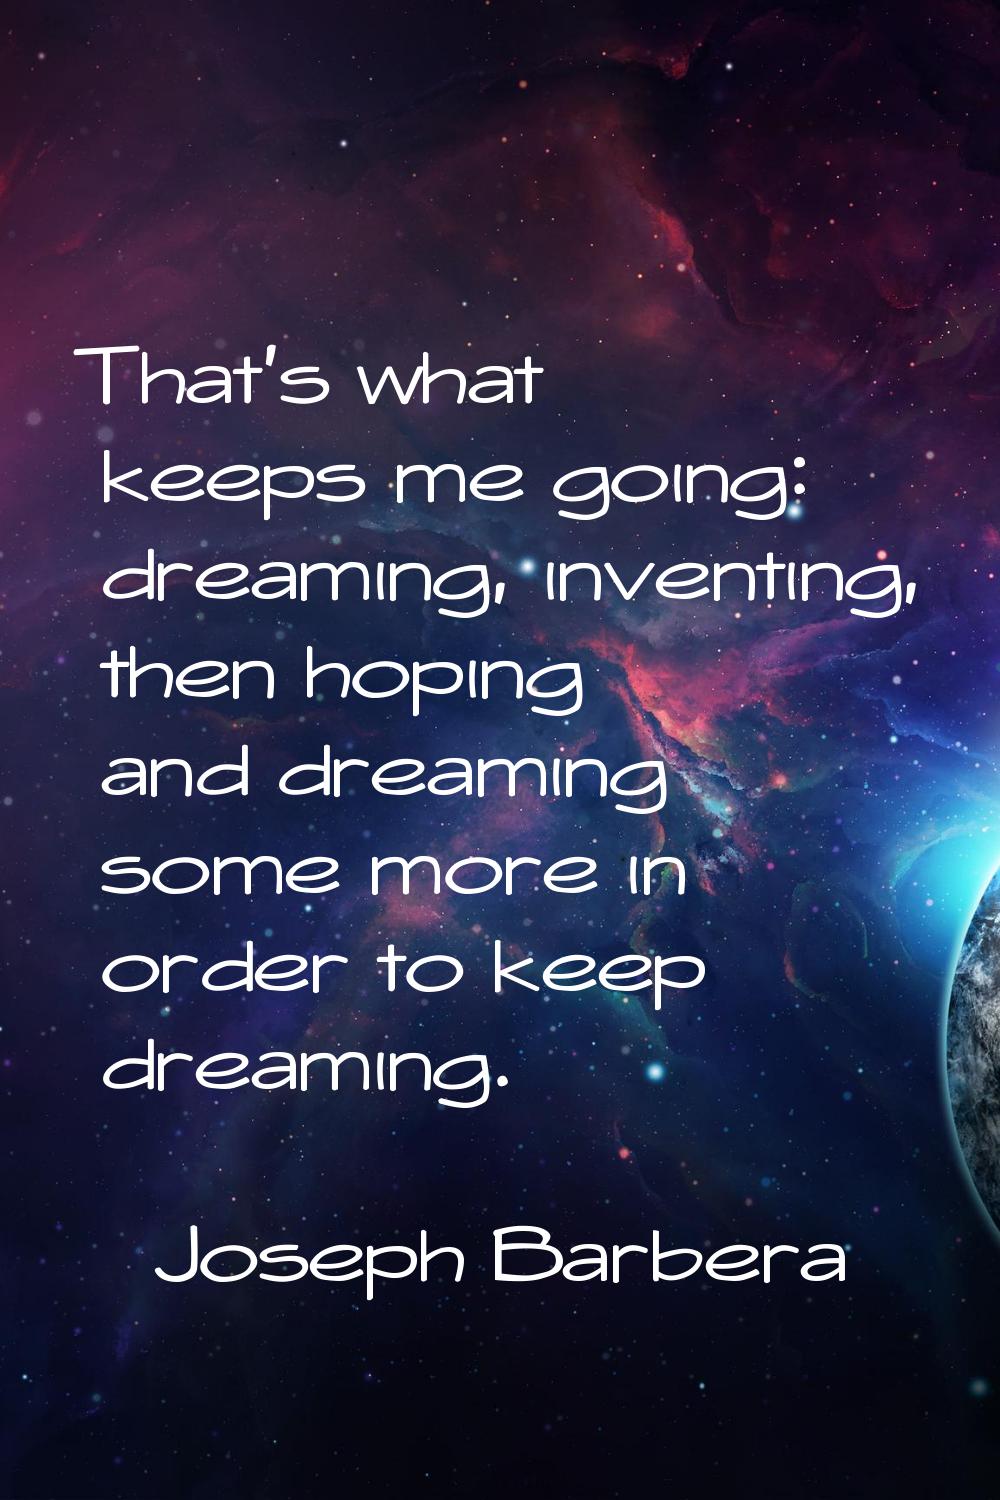 That's what keeps me going: dreaming, inventing, then hoping and dreaming some more in order to kee